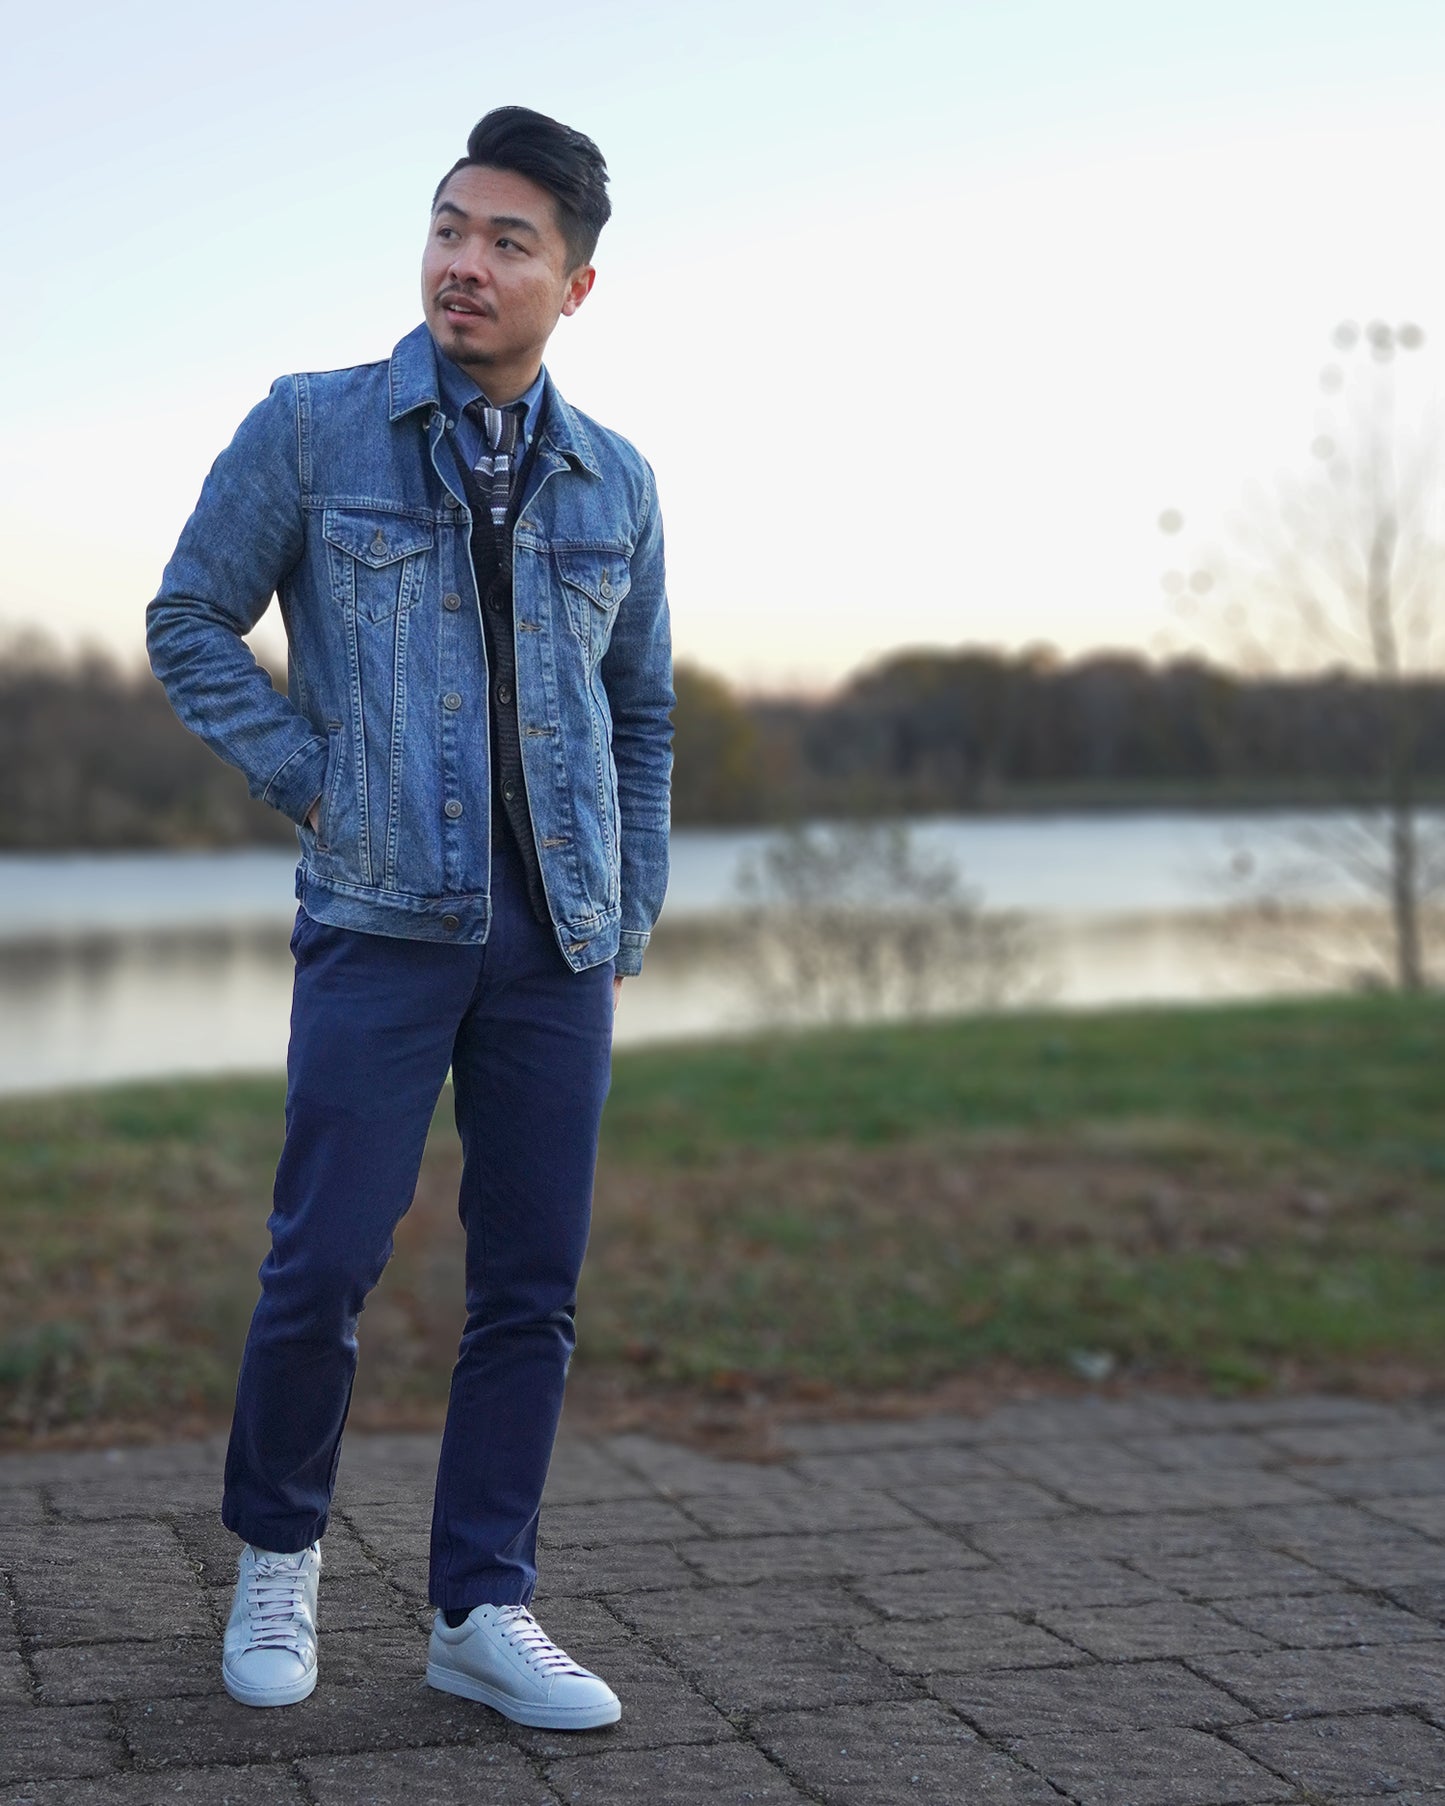 the melbourne knit tie paired with a denim jacket